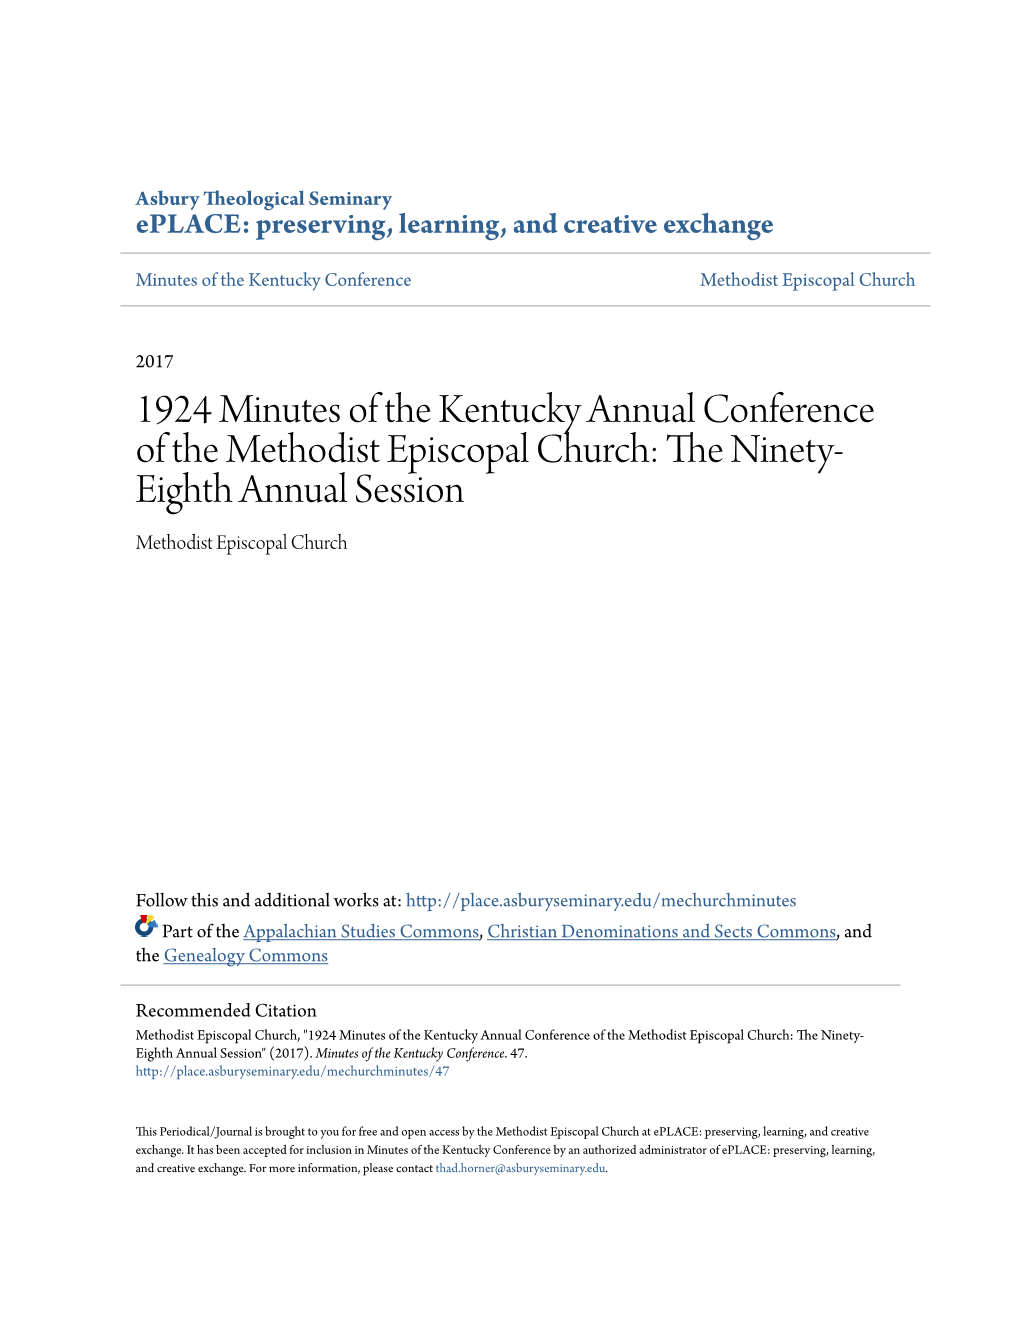 1924 Minutes of the Kentucky Annual Conference of the Methodist Episcopal Church: the Inetn Y- Eighth Annual Session Methodist Episcopal Church